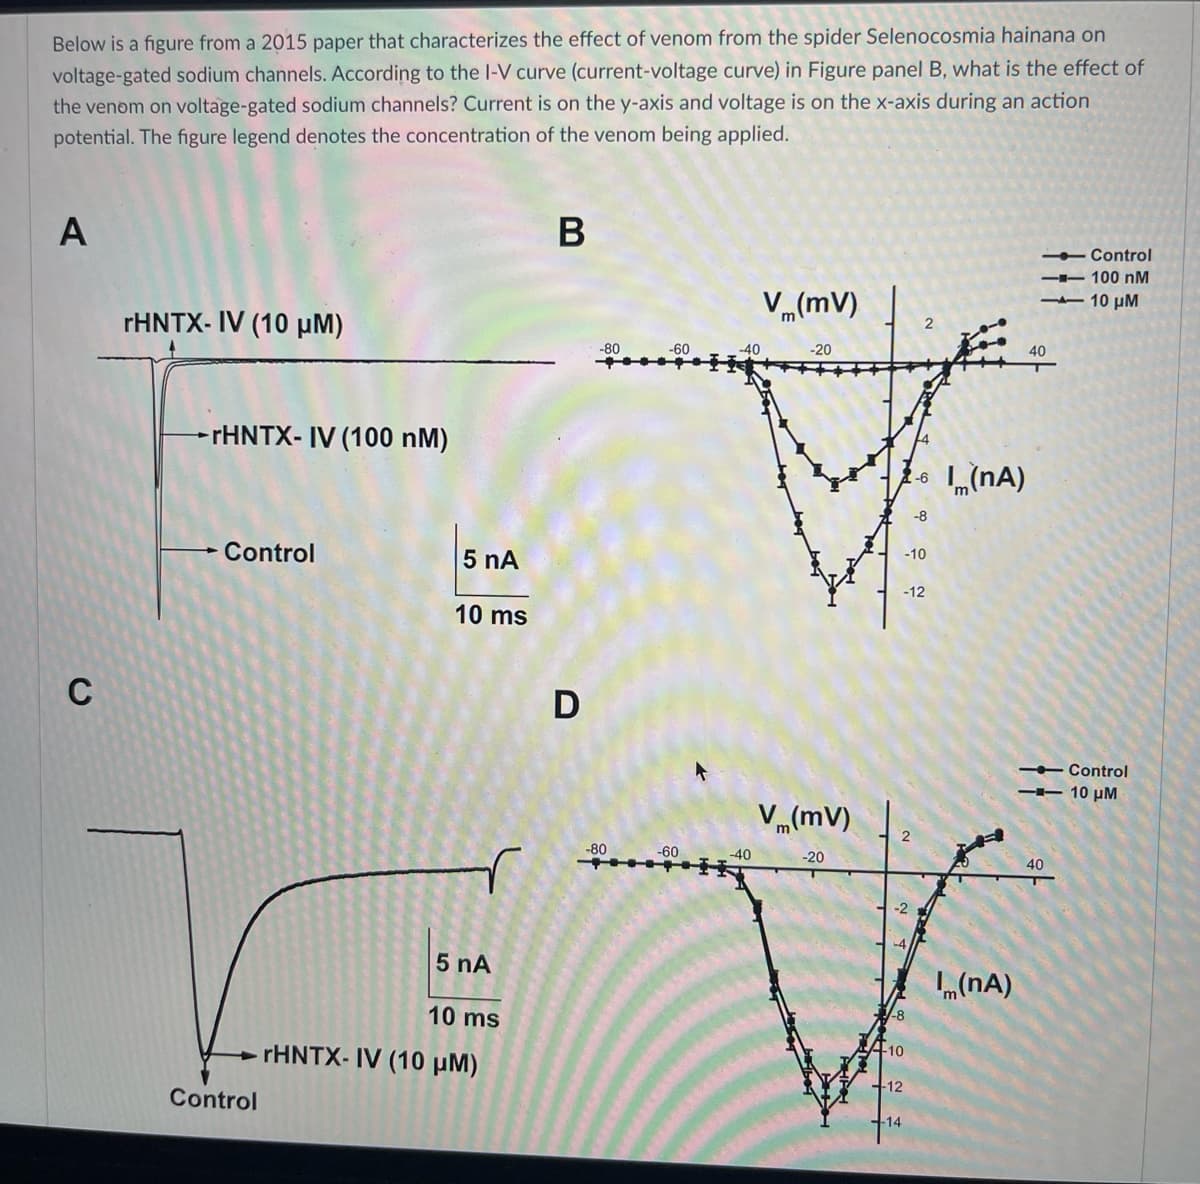 Below is a figure from a 2015 paper that characterizes the effect of venom from the spider Selenocosmia hainana on
voltage-gated sodium channels. According to the I-V curve (current-voltage curve) in Figure panel B, what is the effect of
the venom on voltage-gated sodium channels? Current is on the y-axis and voltage is on the x-axis during an action
potential. The figure legend denotes the concentration of the venom being applied.
A
C
rHNTX-IV (10 μM)
-rHNTX-IV (100 nM)
Control
Control
5 nA
10 ms
r
5 nA
10 ms
rHNTX- IV (10 μM)
B
D
-80
-80
-60
-60
A
-40
-40
V (mv)
-20
V(mv)
-20
be
TOLF
2-6 I (NA)
-8
ON
-12
10
-12
-14
-8
-10
(NA)
Control
100 nM
— 10 μΜ
40
-Control
-- 10 μM
40